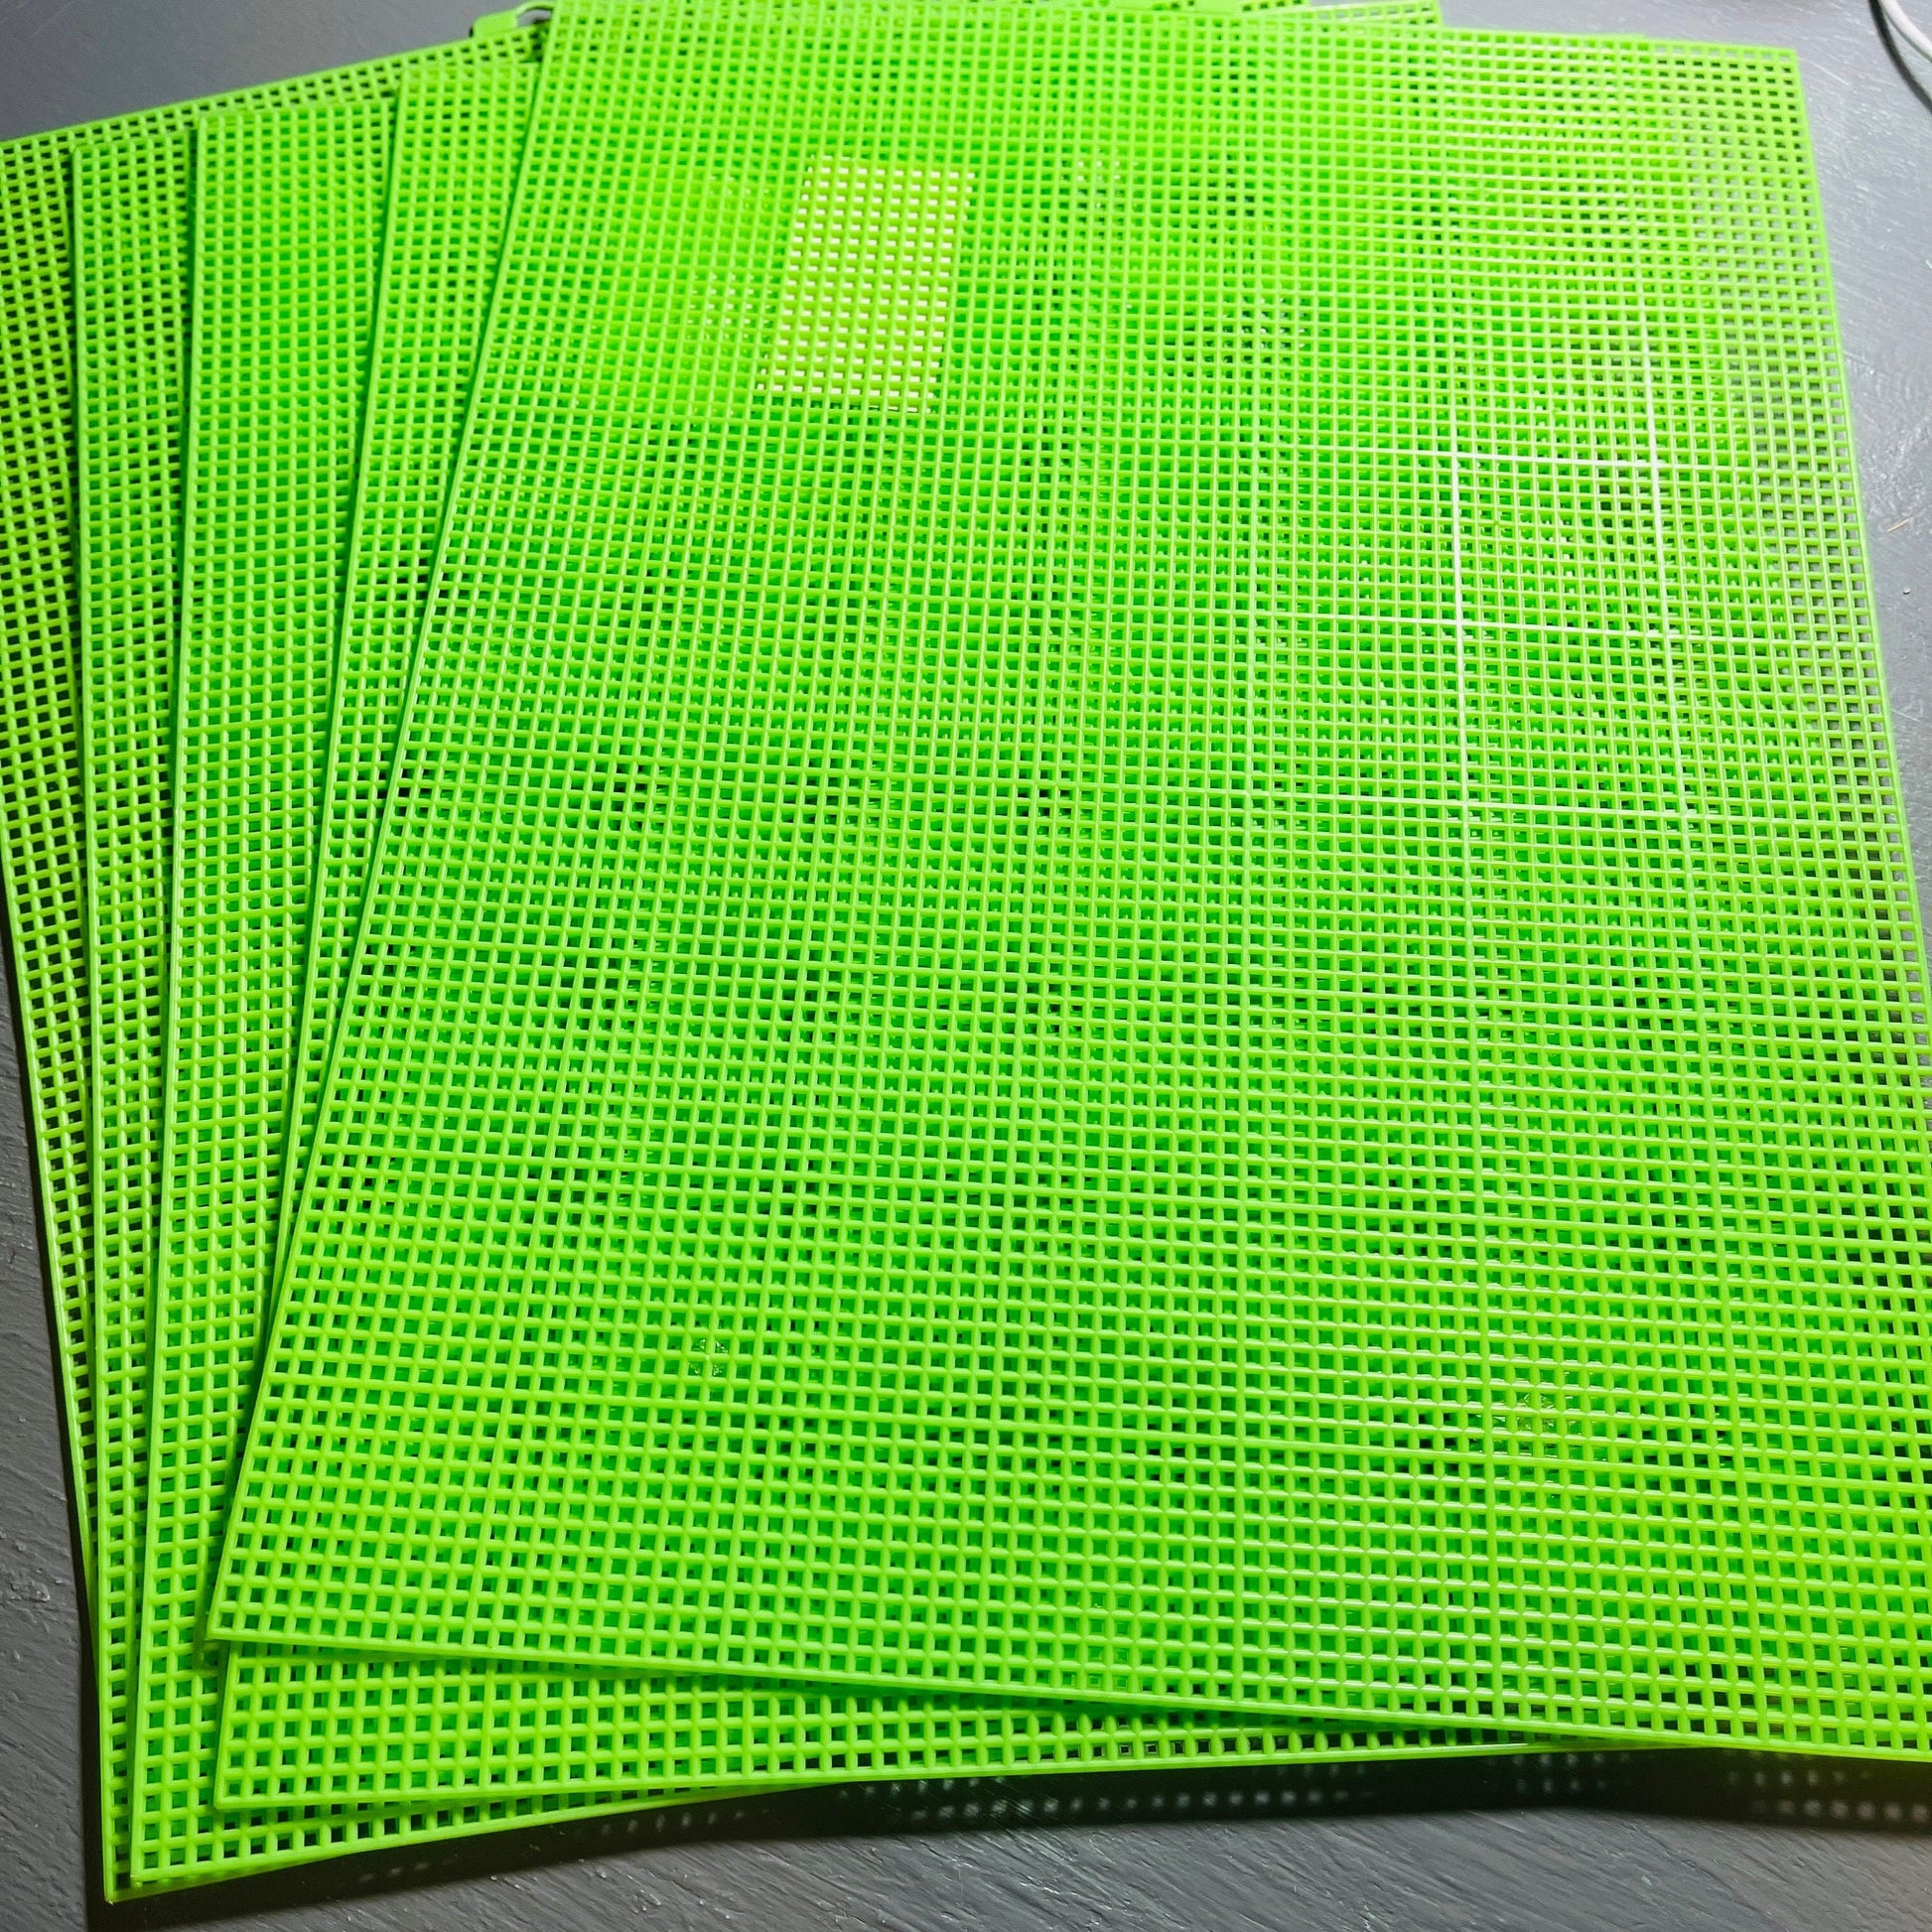 Plastic Canvas, 7 mesh, 10.5 by 13.5 Inch, Please See Variations